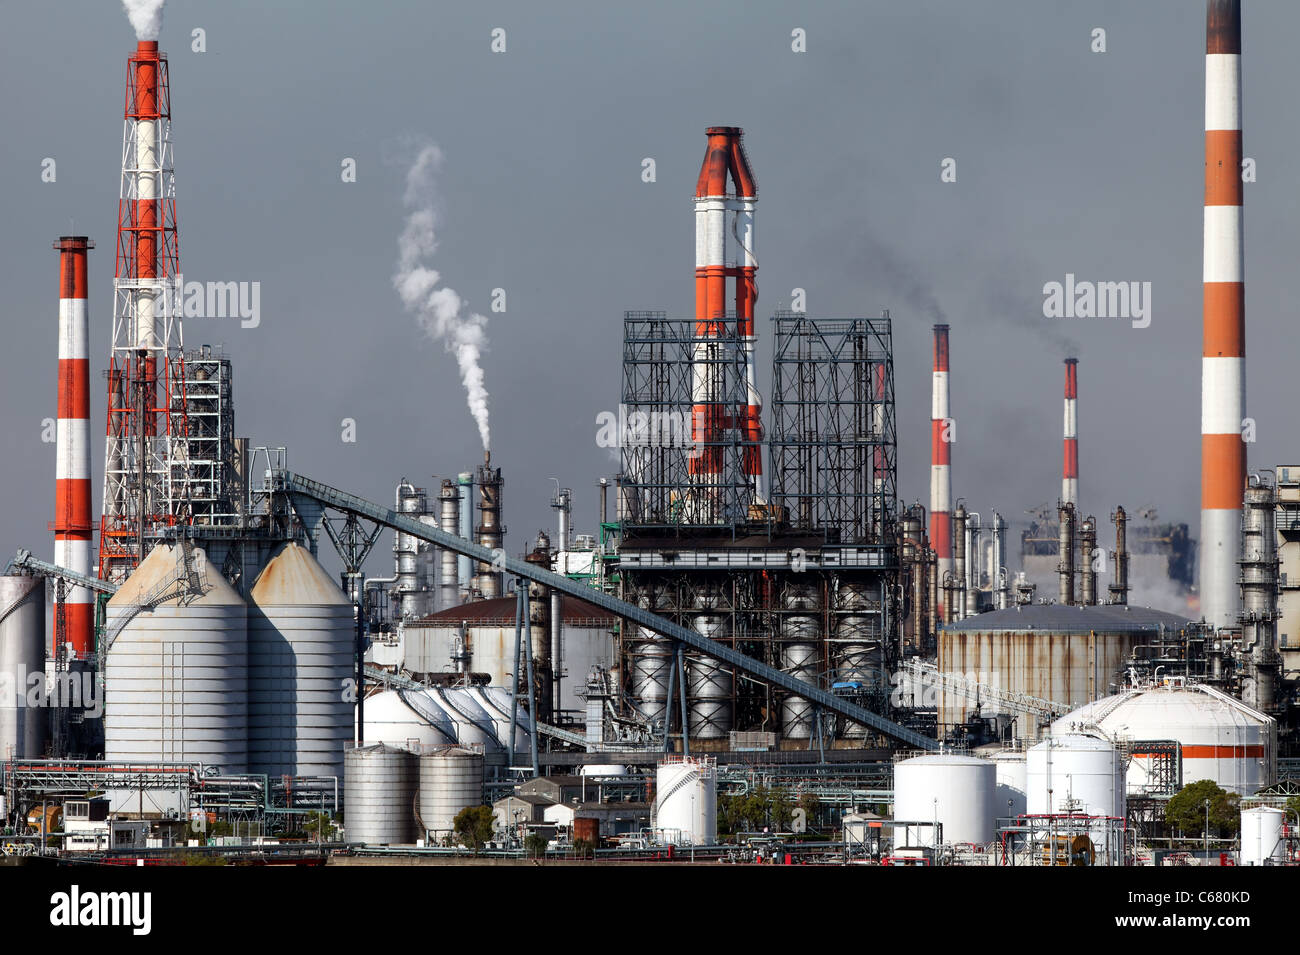 Industrial plant with smoke stacks, Industrial area Stock Photo